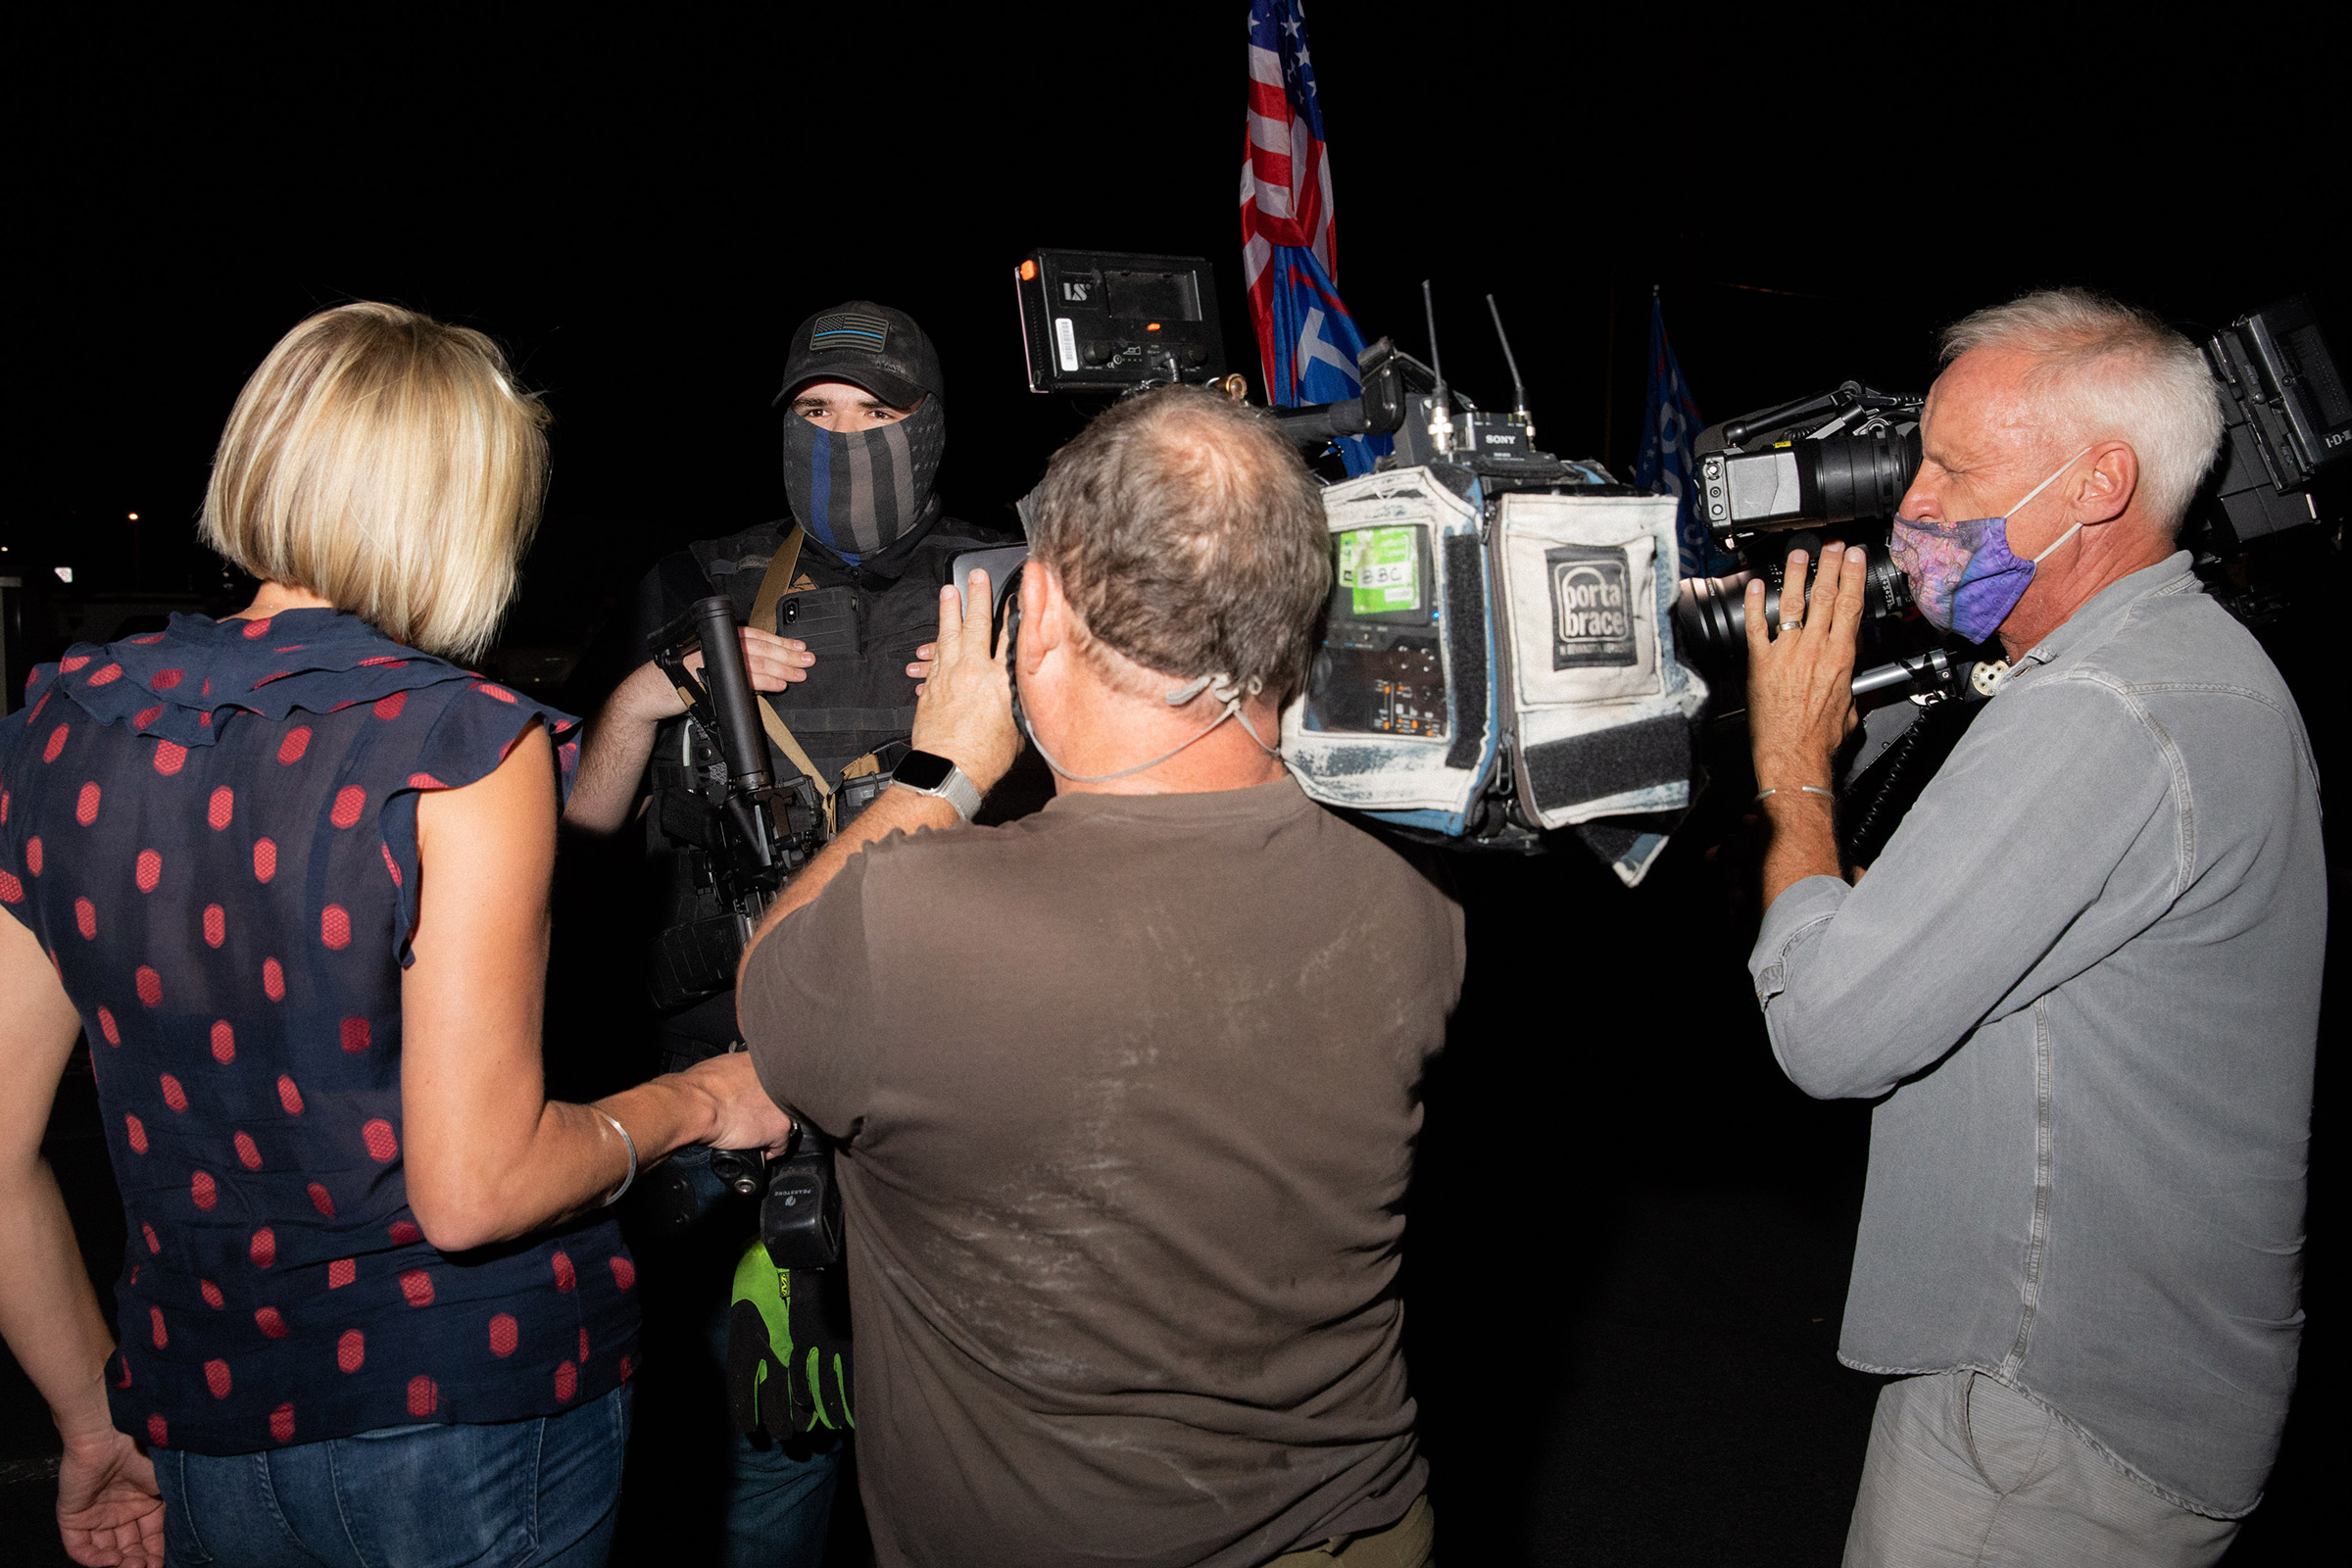 A member of a militia is flanked by cameras at the Maricopa County Elections office in Phoenix, on Nov. 5